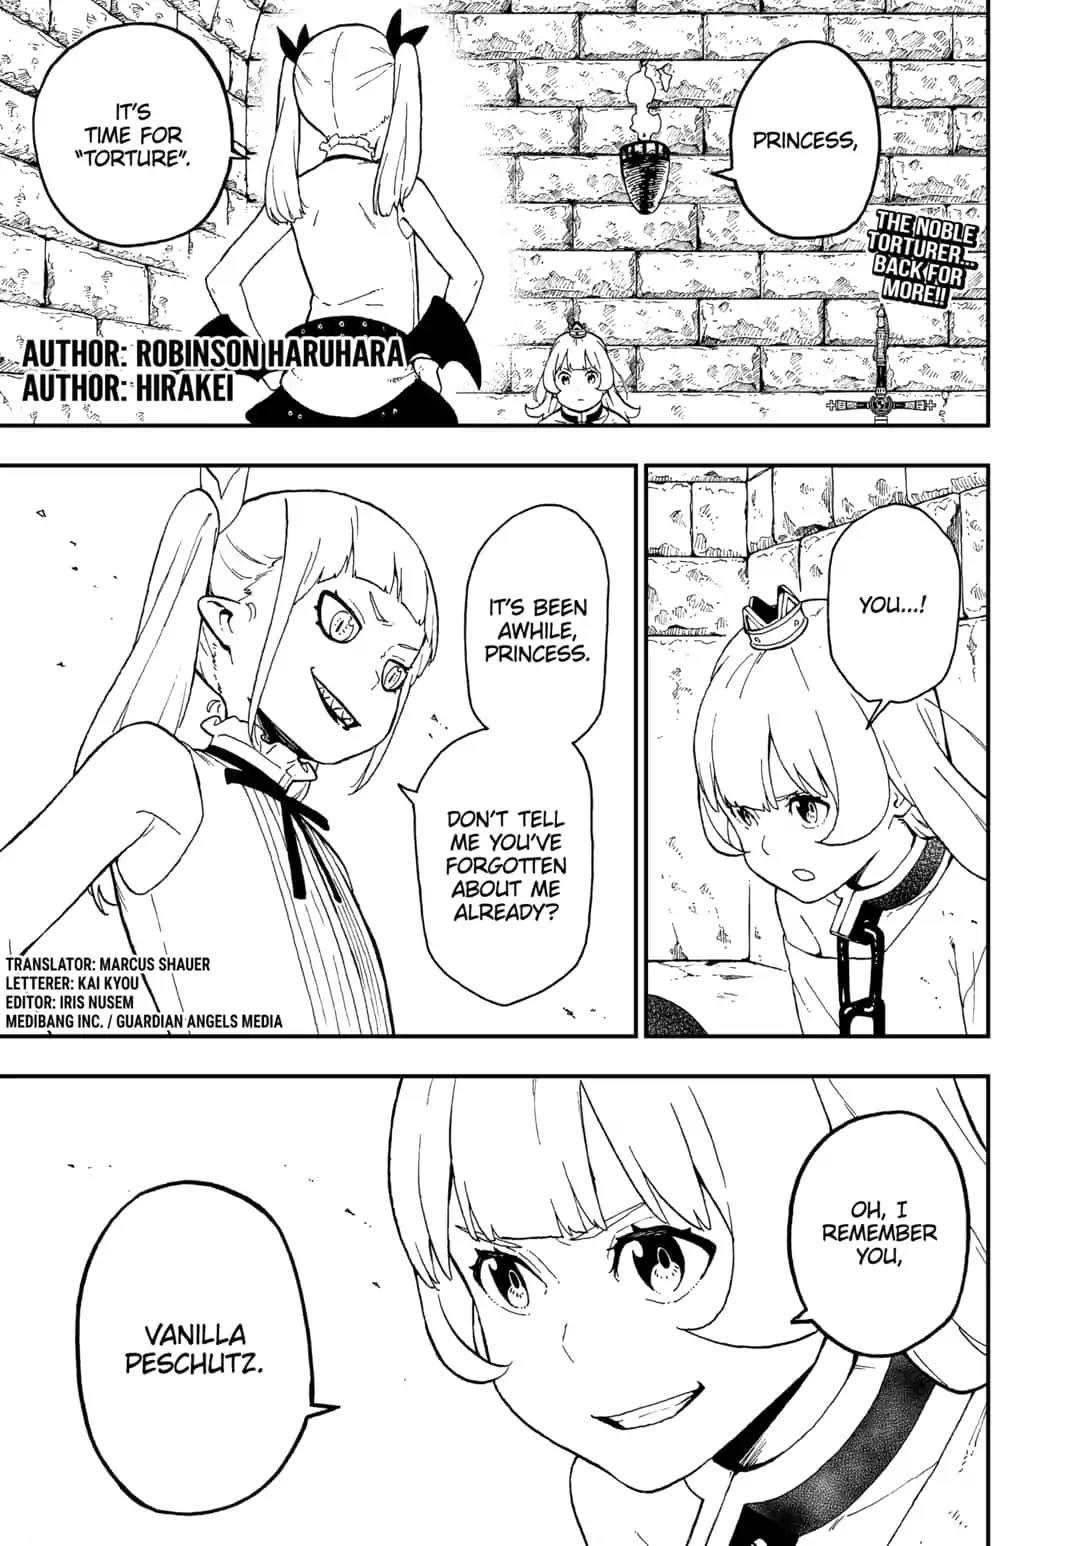 It's Time for "Interrogation", Princess! - chapter 45 - #1